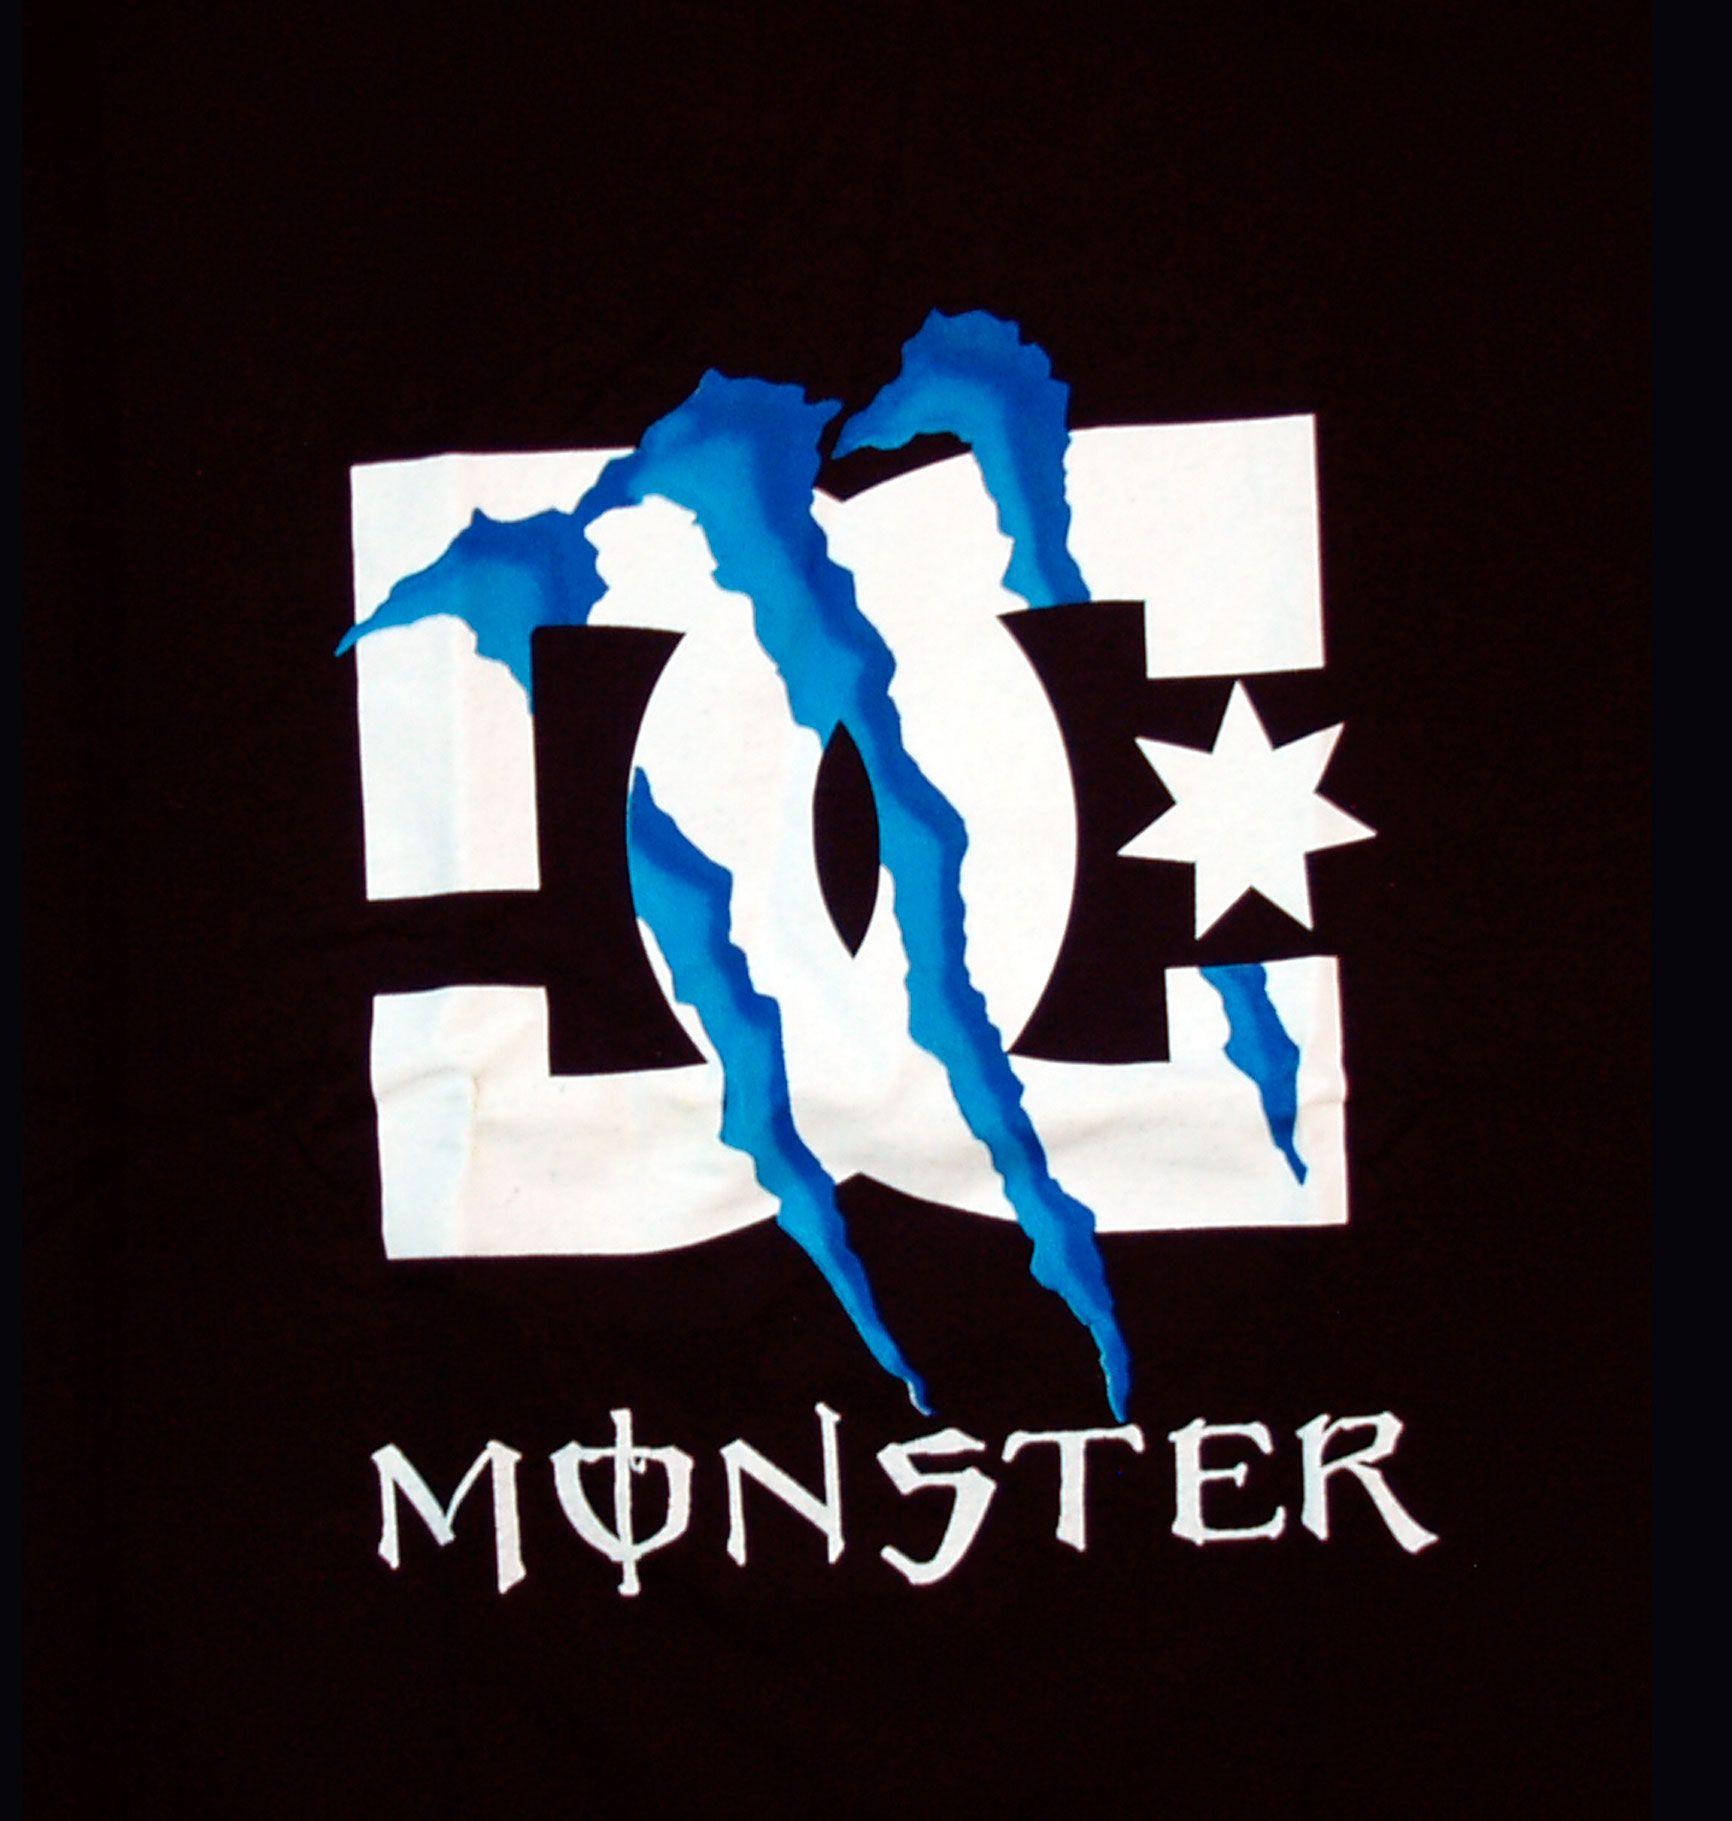 Cool Fox and Monster Logo - Monster and dc Logos